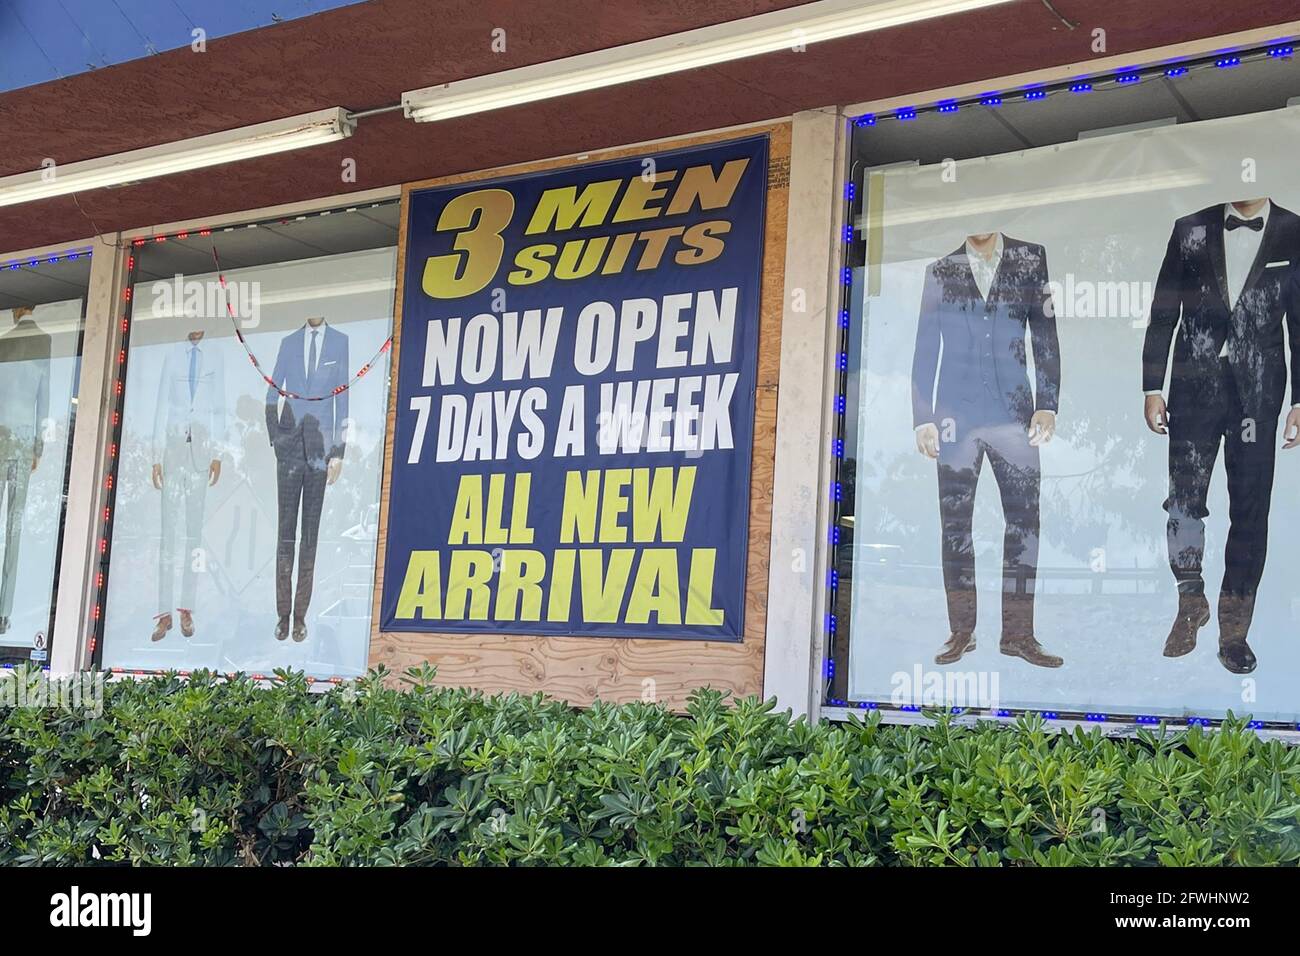 A 'Now Open 7 Days A Week' sign at 3 Men's Suits, Saturday, May 22, 2021, in Montebello, Calif. Stock Photo